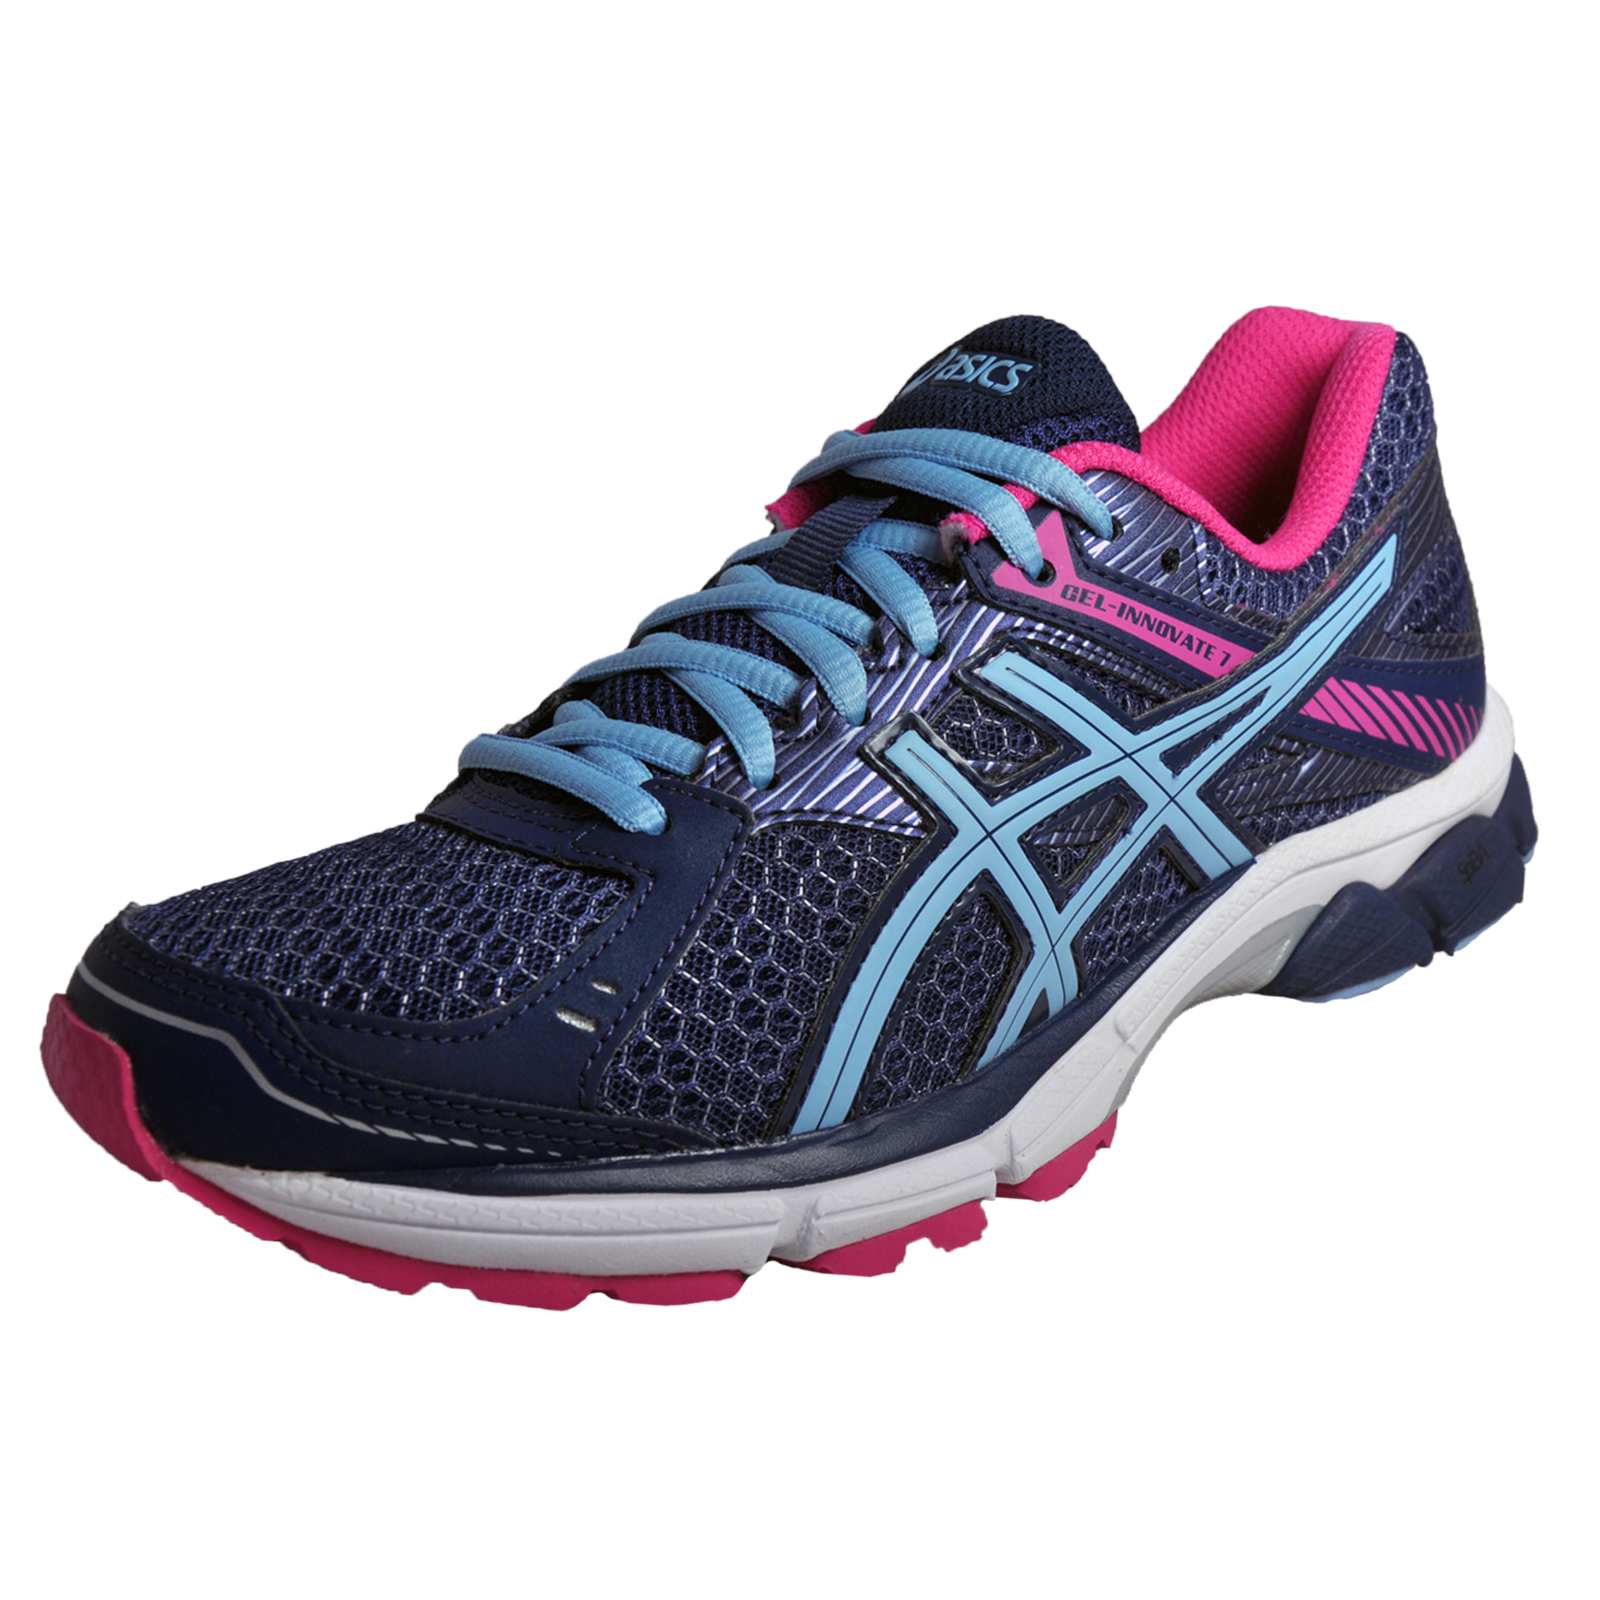 Asics Gel Innovate 7 Womens Premium Running Shoes Fitness Gym Trainers ...